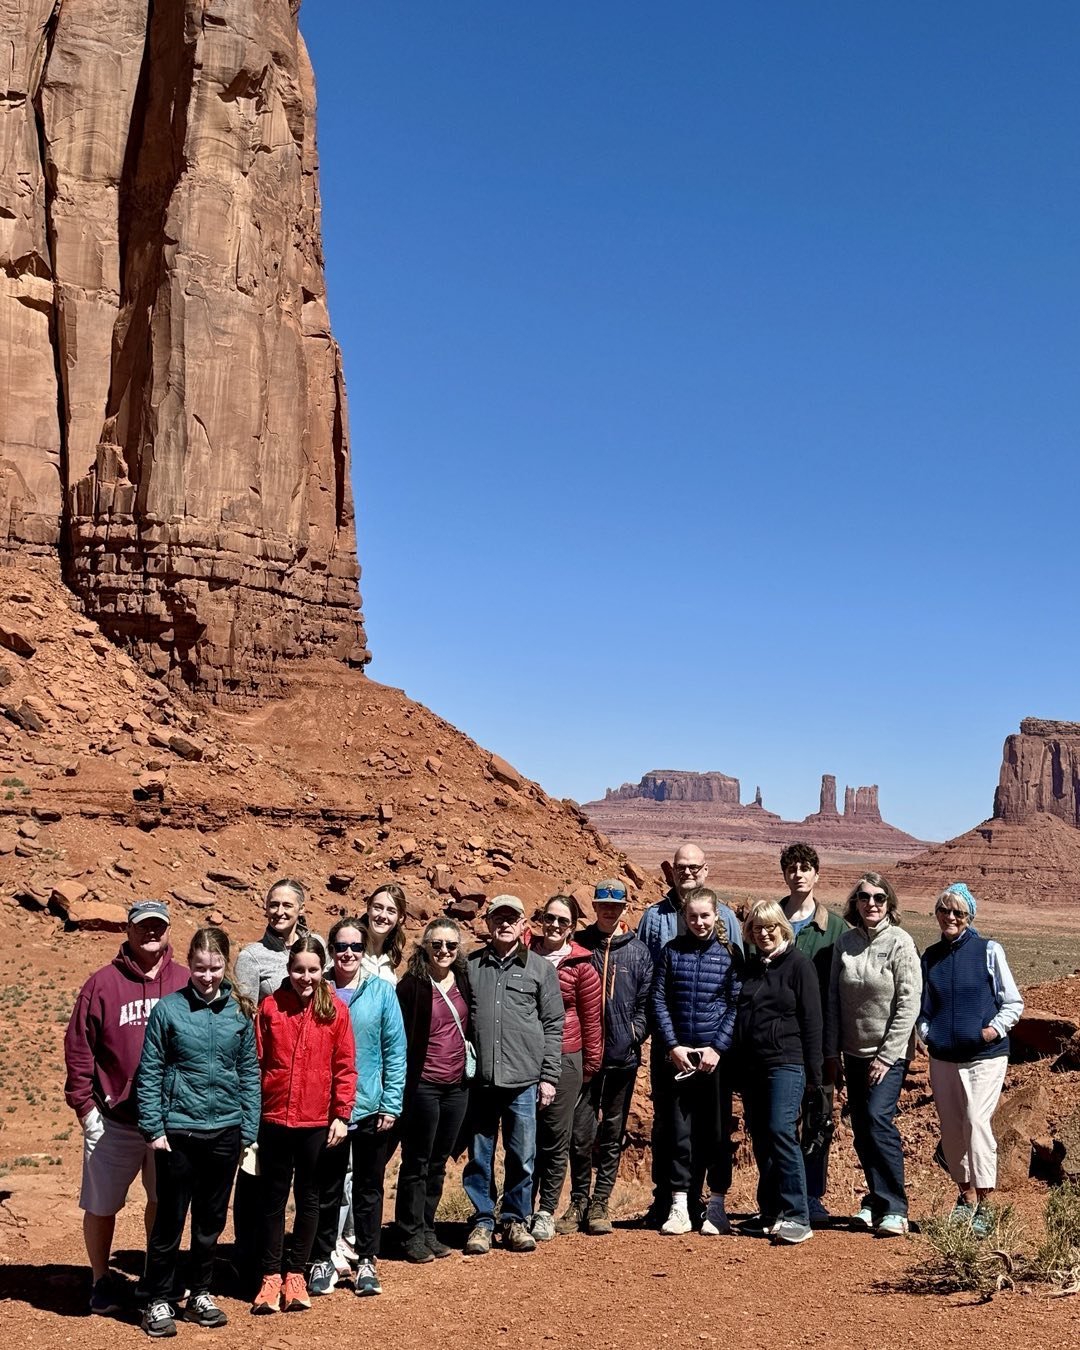 The team&hellip;
Monument Valley